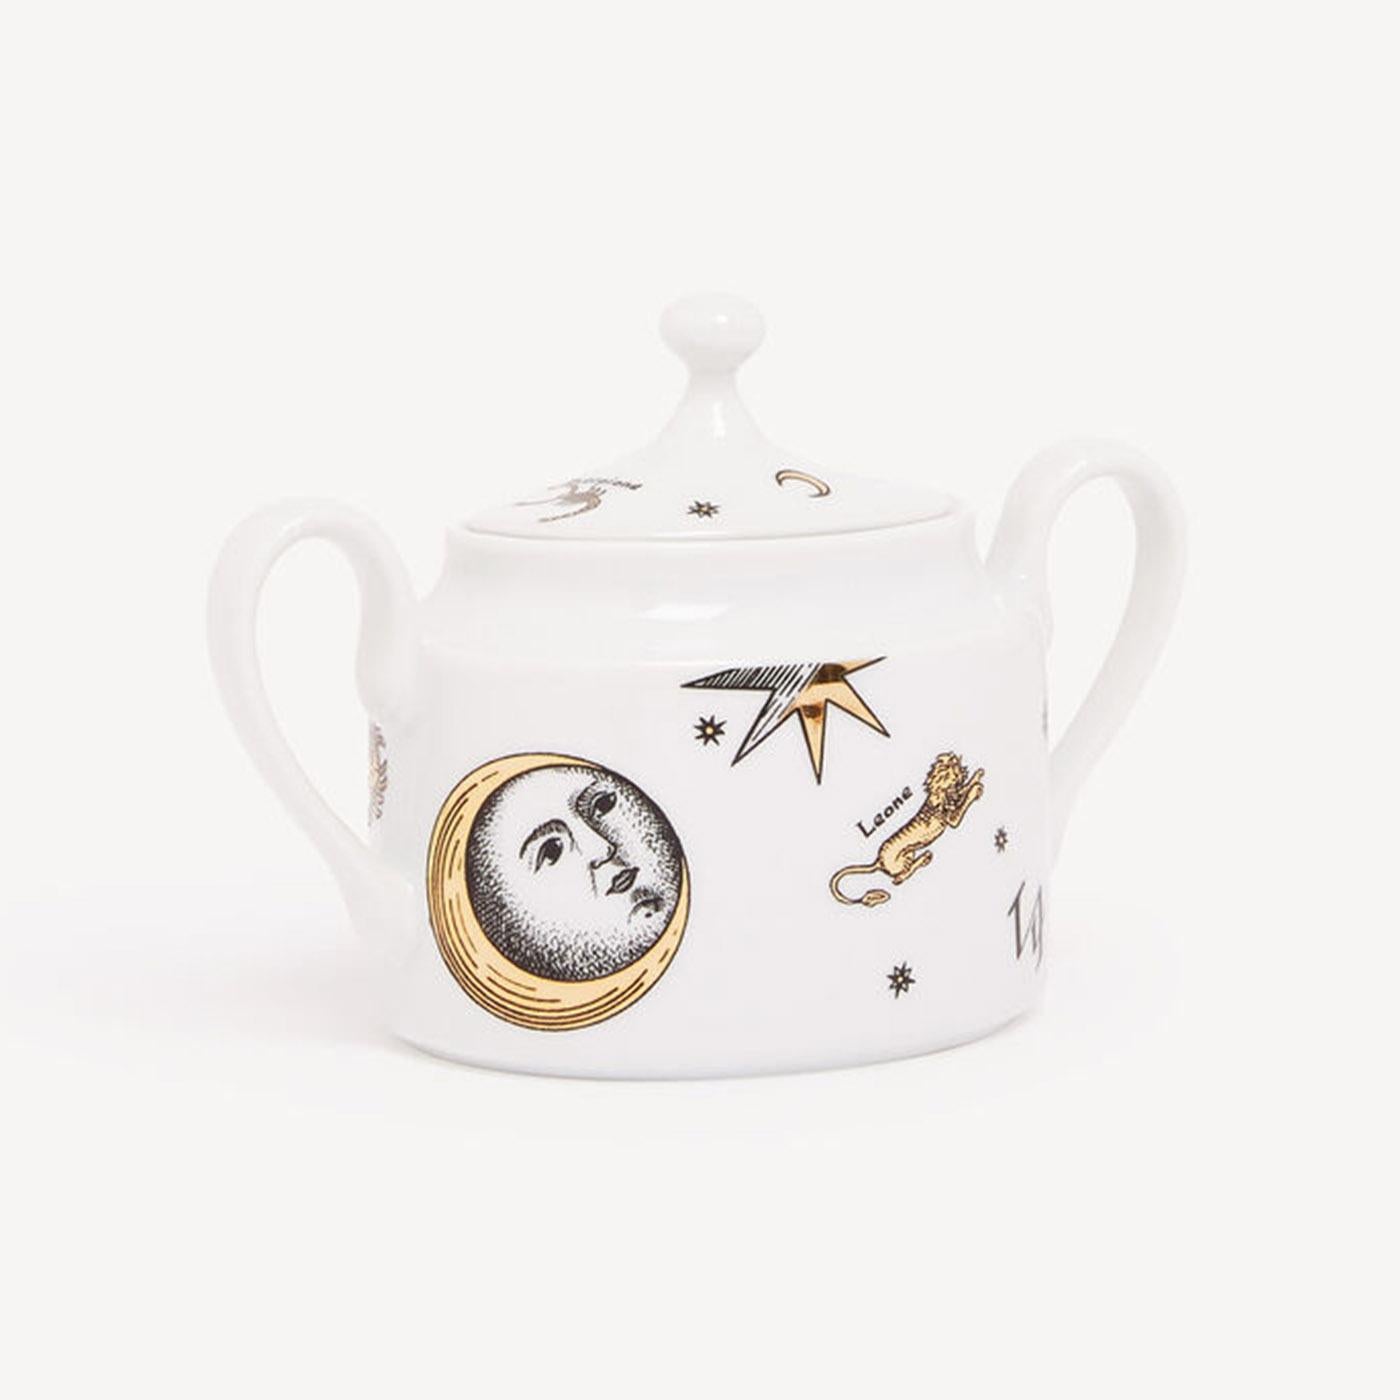 Precious zodiac decorations grace this hand-decorated porcelain sugar bowl with gold accents, transferring Fornasetti's imagery to an object for daily use and thereby transforming it into a collector's item. Any minor discrepancies between similar